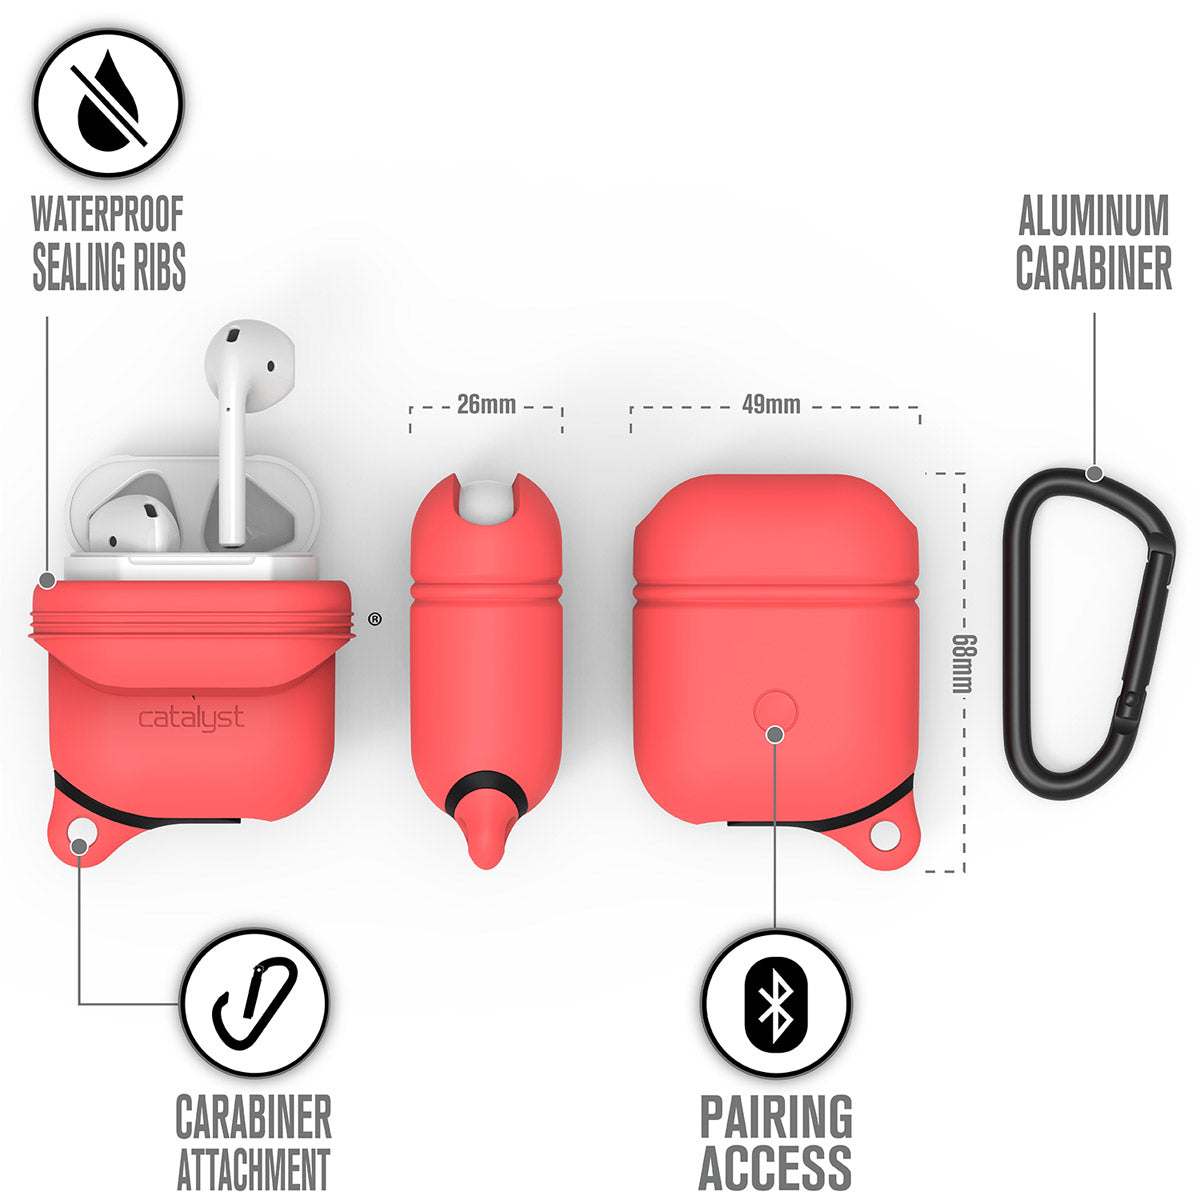 Catalyst airpods gen2/1 waterproof case + carabiner showing the case dimension and features in coral text reads waterproof sealing ribs aluminum carabiner pairing access carabiner attachment